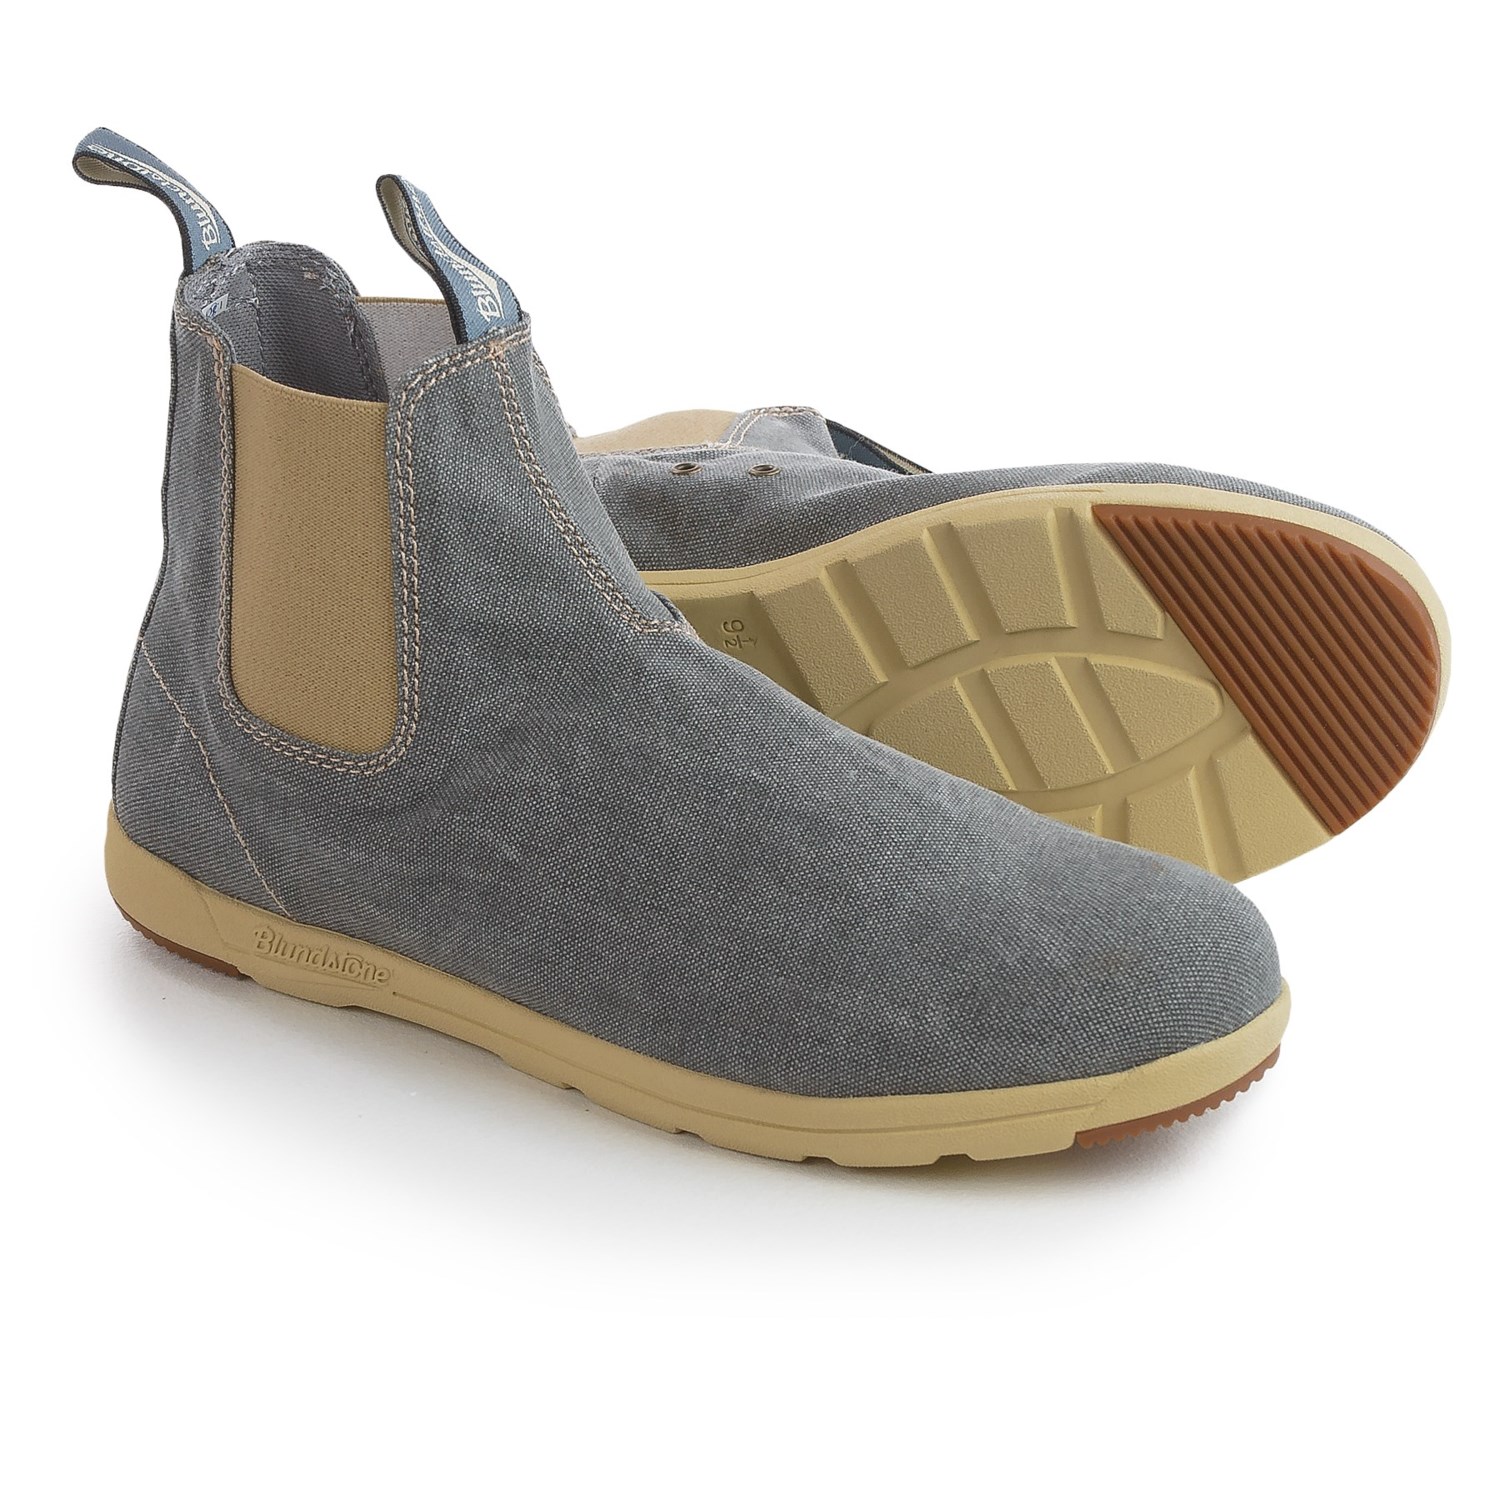 Blundstone Canvas Chelsea Boots (For Men and Women) - Save 79%